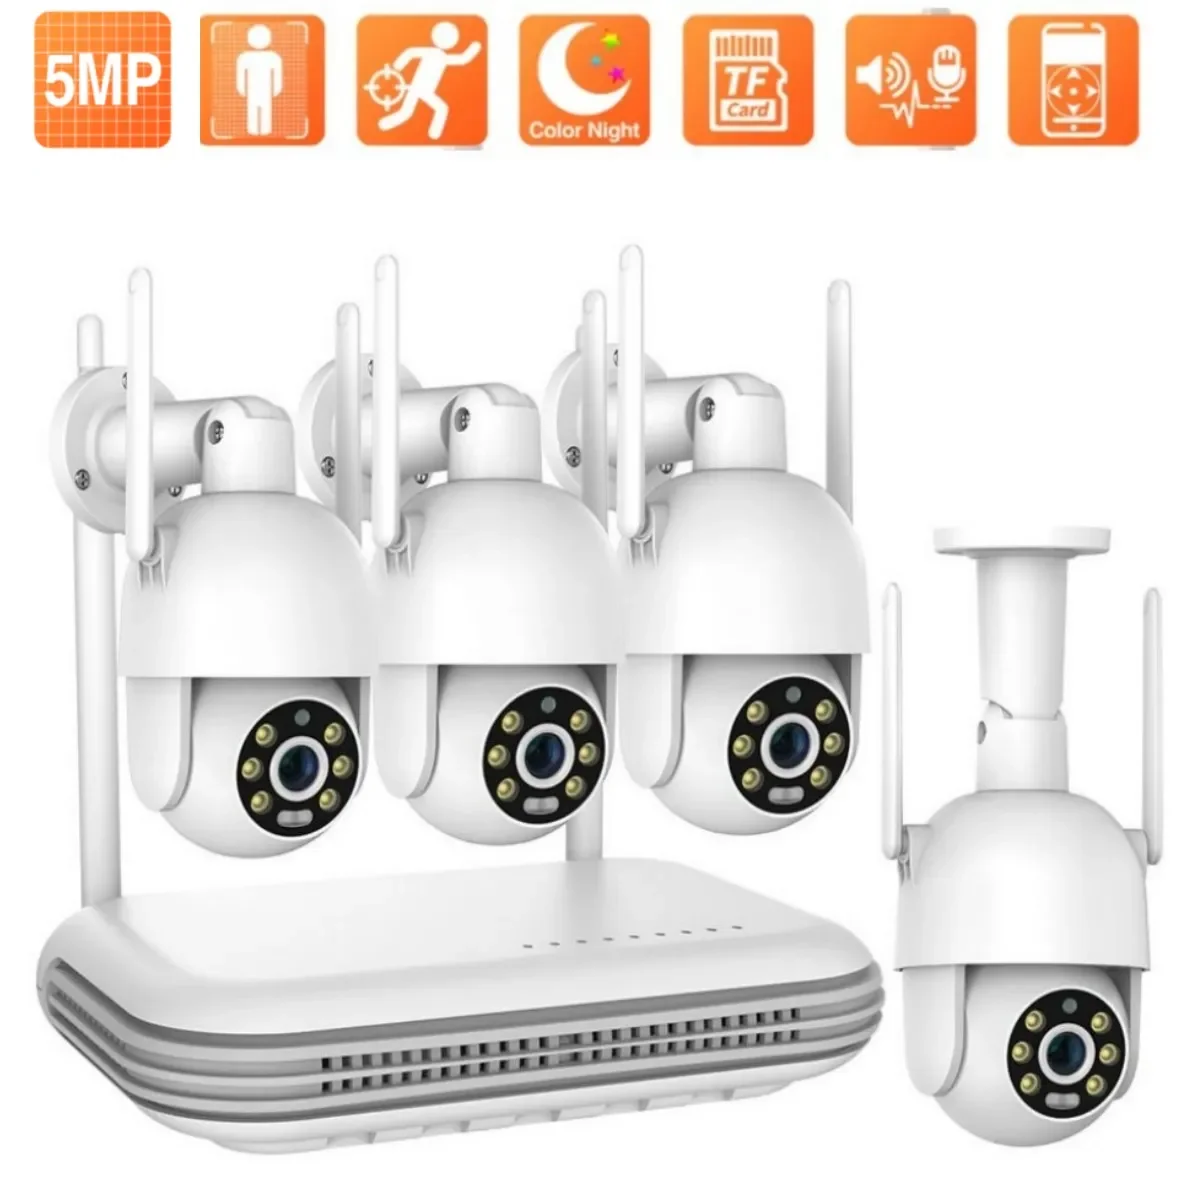 Techage UHD 5MP Wifi CCTV Camera With NVR Wireless H.265 8CH Outdoor Wifi Surveillance Cameras Smart Two-way Audio Support Onvif